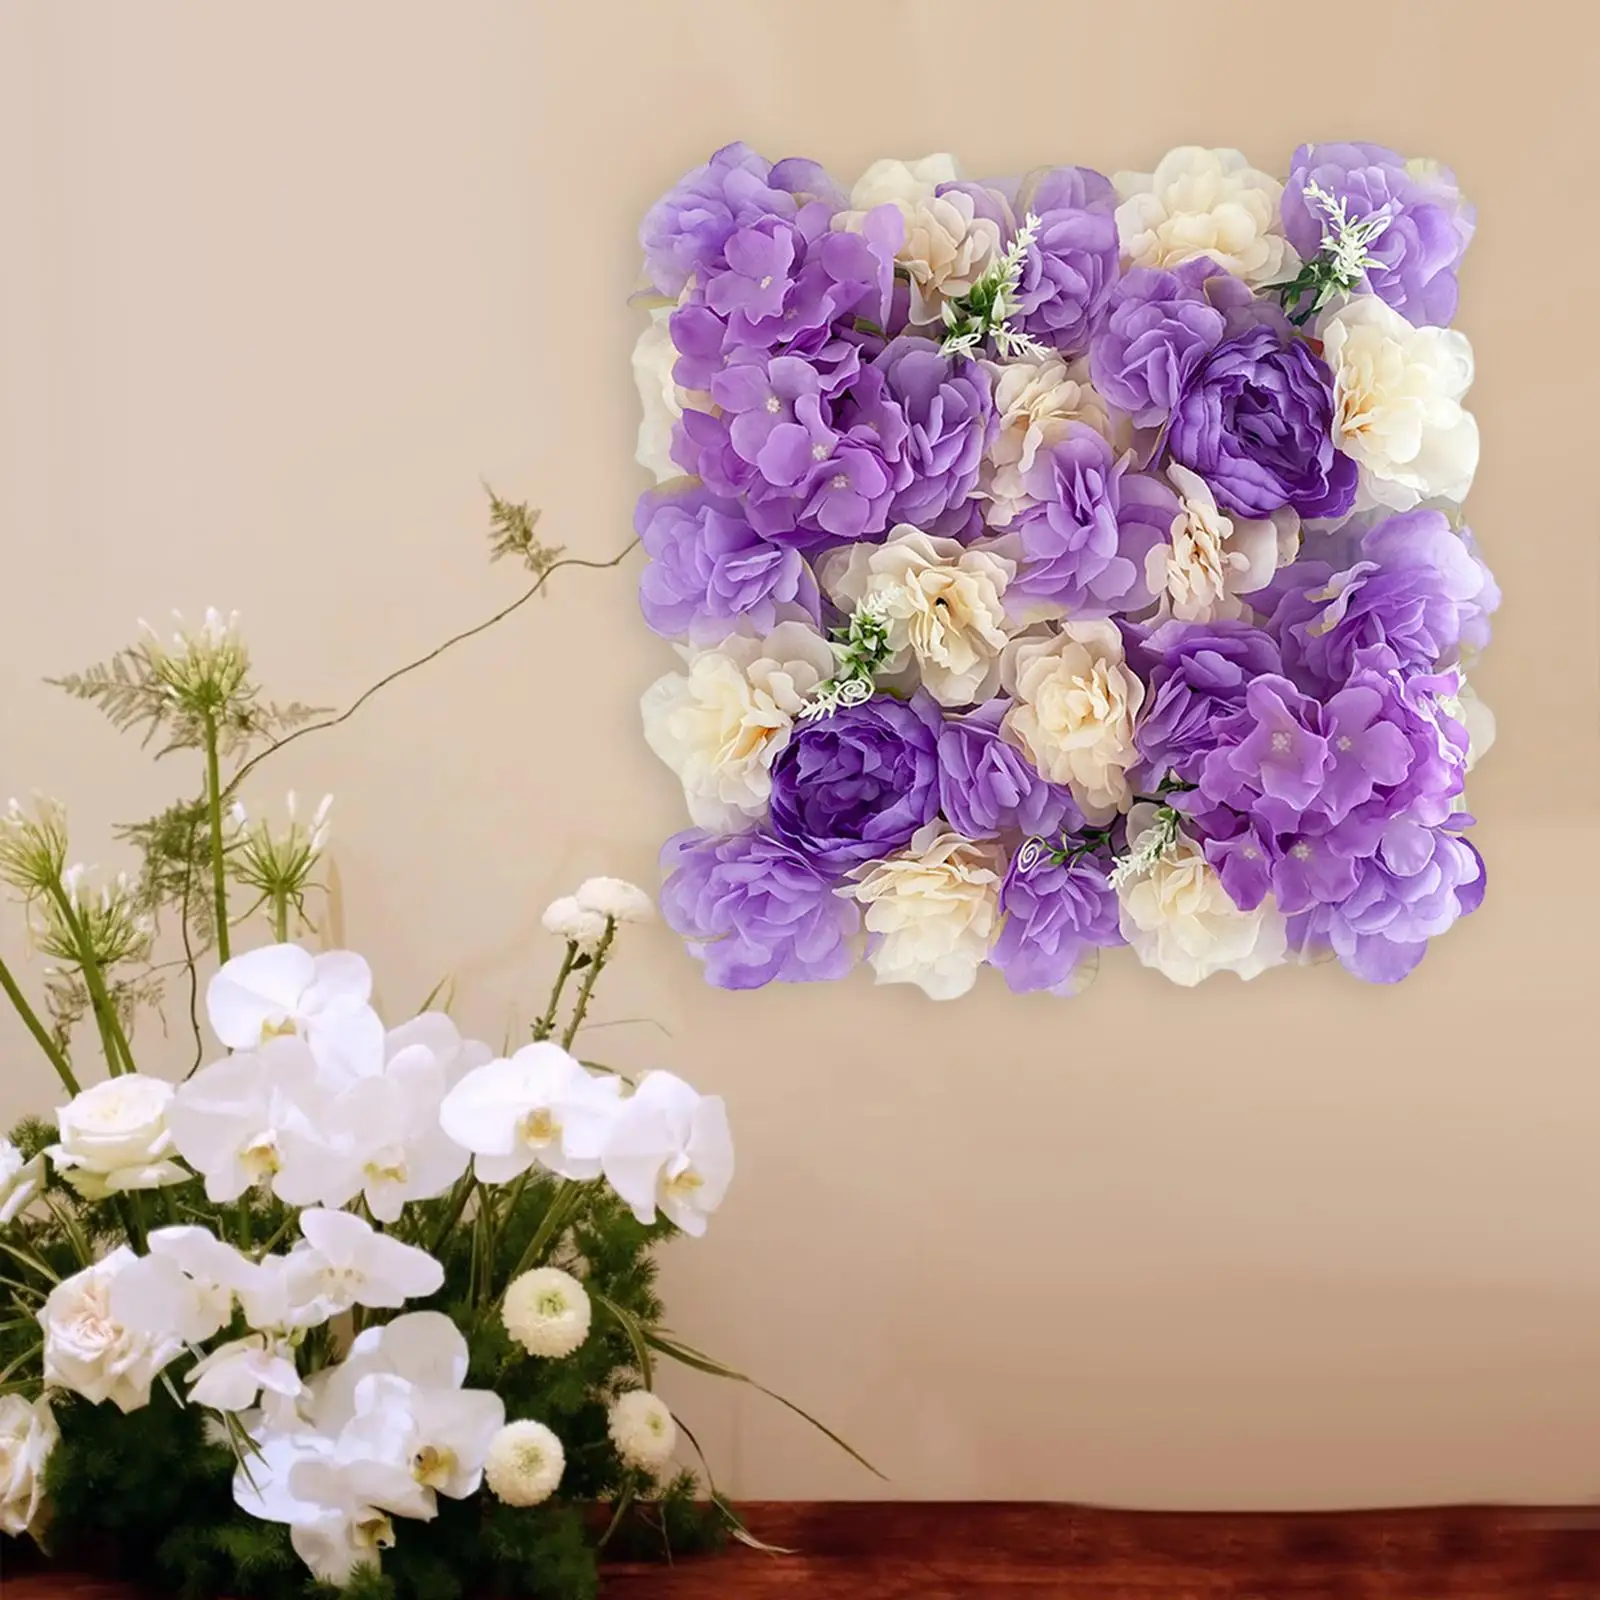 DIY Arch Flower Row Artificial Flower Wall Panel Wedding Road Cited Flowers for Celebration Party Backyard Event Baby Shower